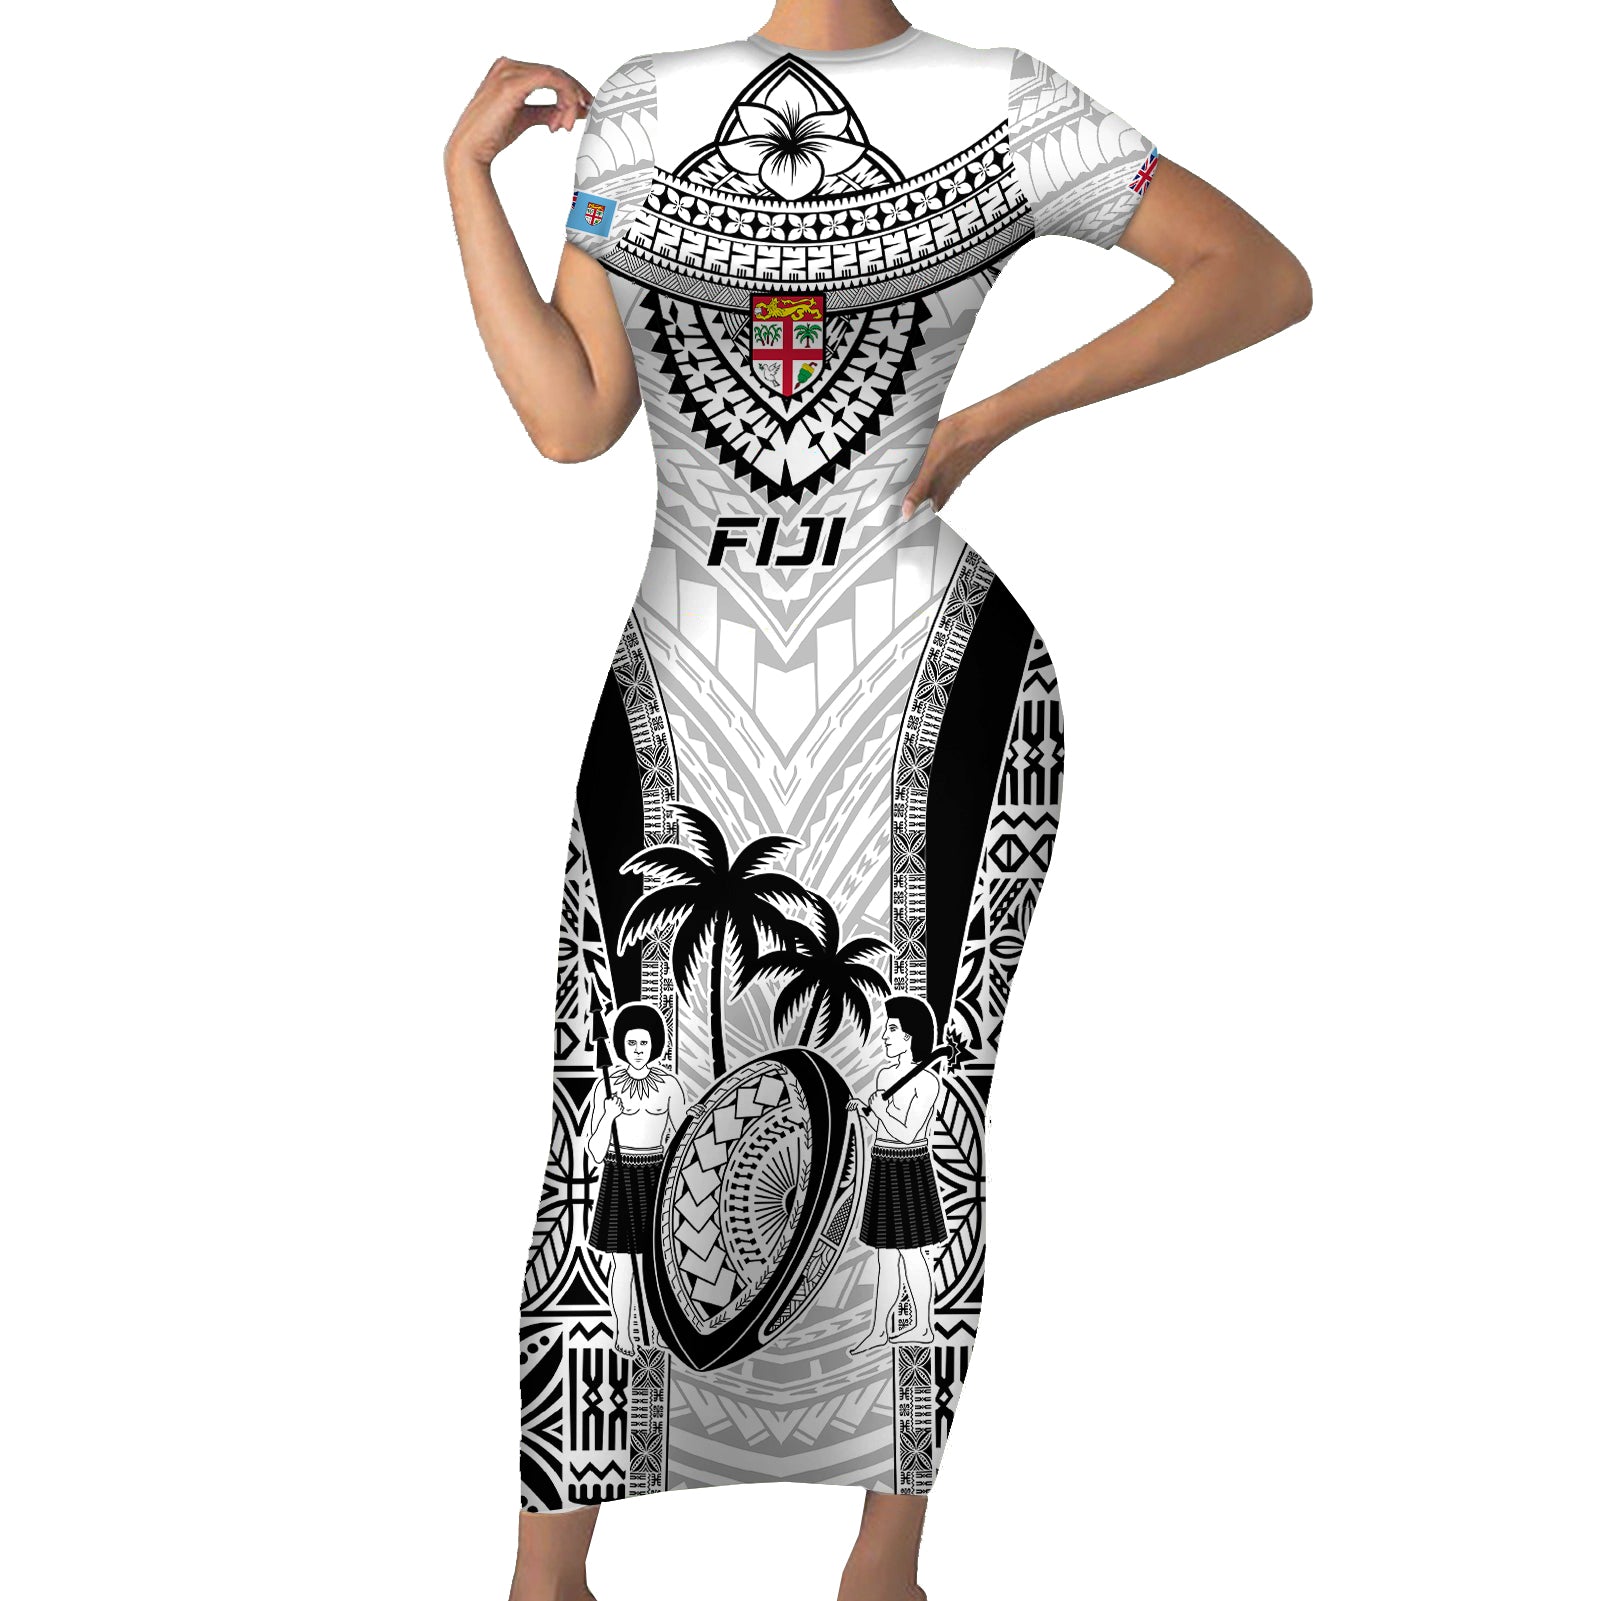 Fiji Rugby Short Sleeve Bodycon Dress Go Champions World Cup 2023 Tapa Unique White Vibe LT9 Long Dress White - Polynesian Pride